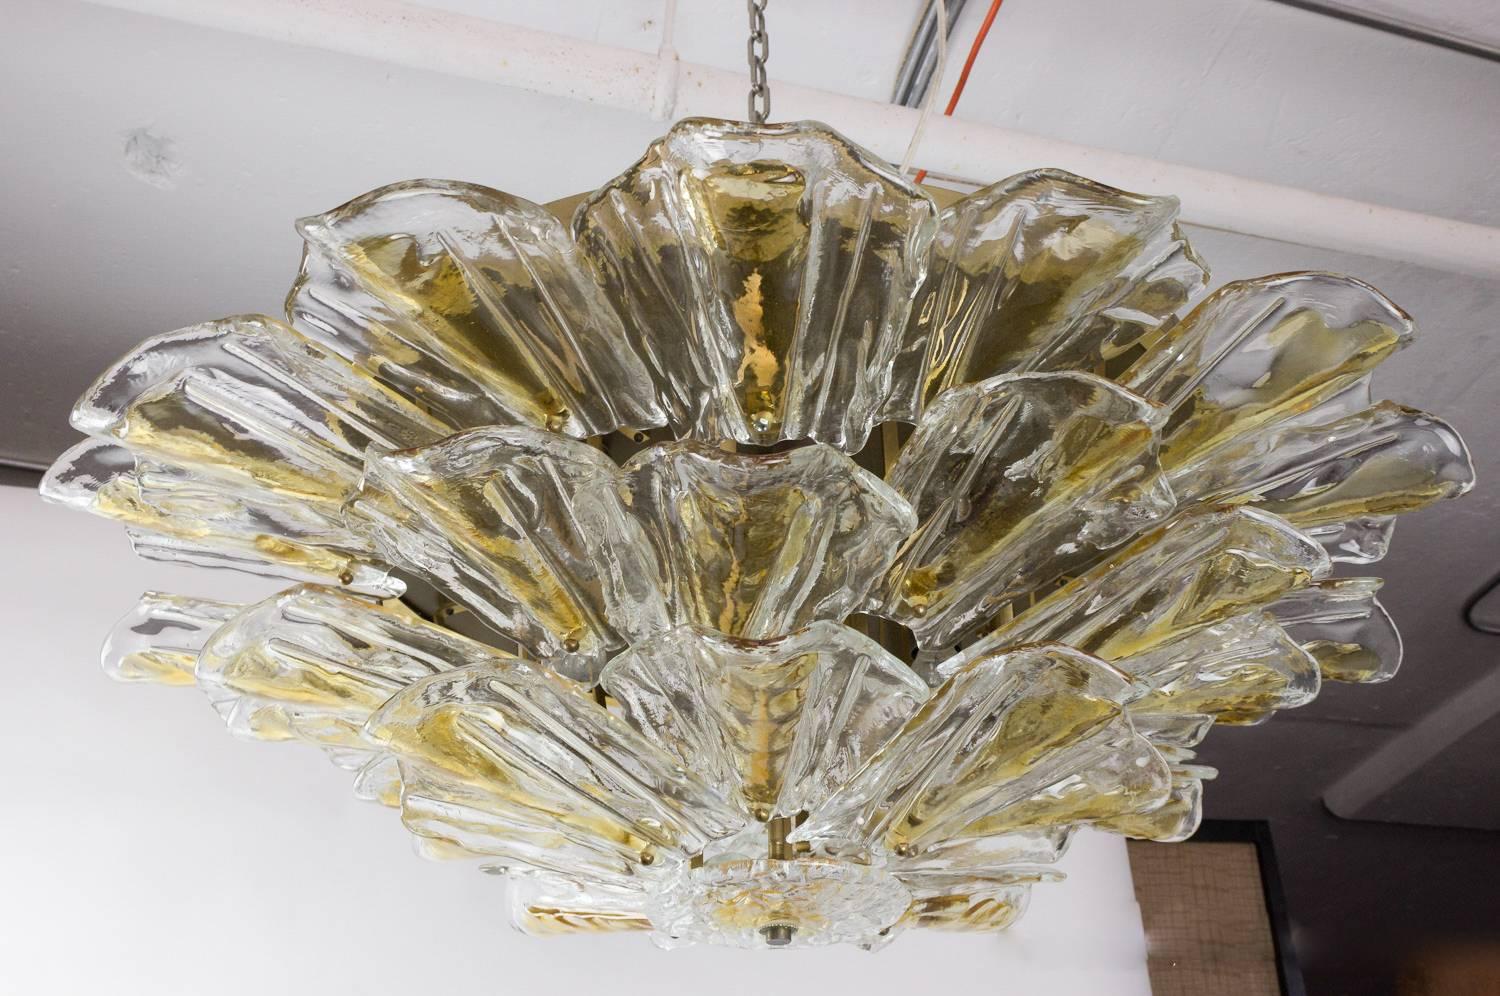 Large flush mounted Murano ceiling fixture with three tiers of dual tone glass; Italian, 1960s. This fixture has been UL wired and tested and fits 12 candelabra bulbs arranged in two concentric rings. The polished brass backplate has also be